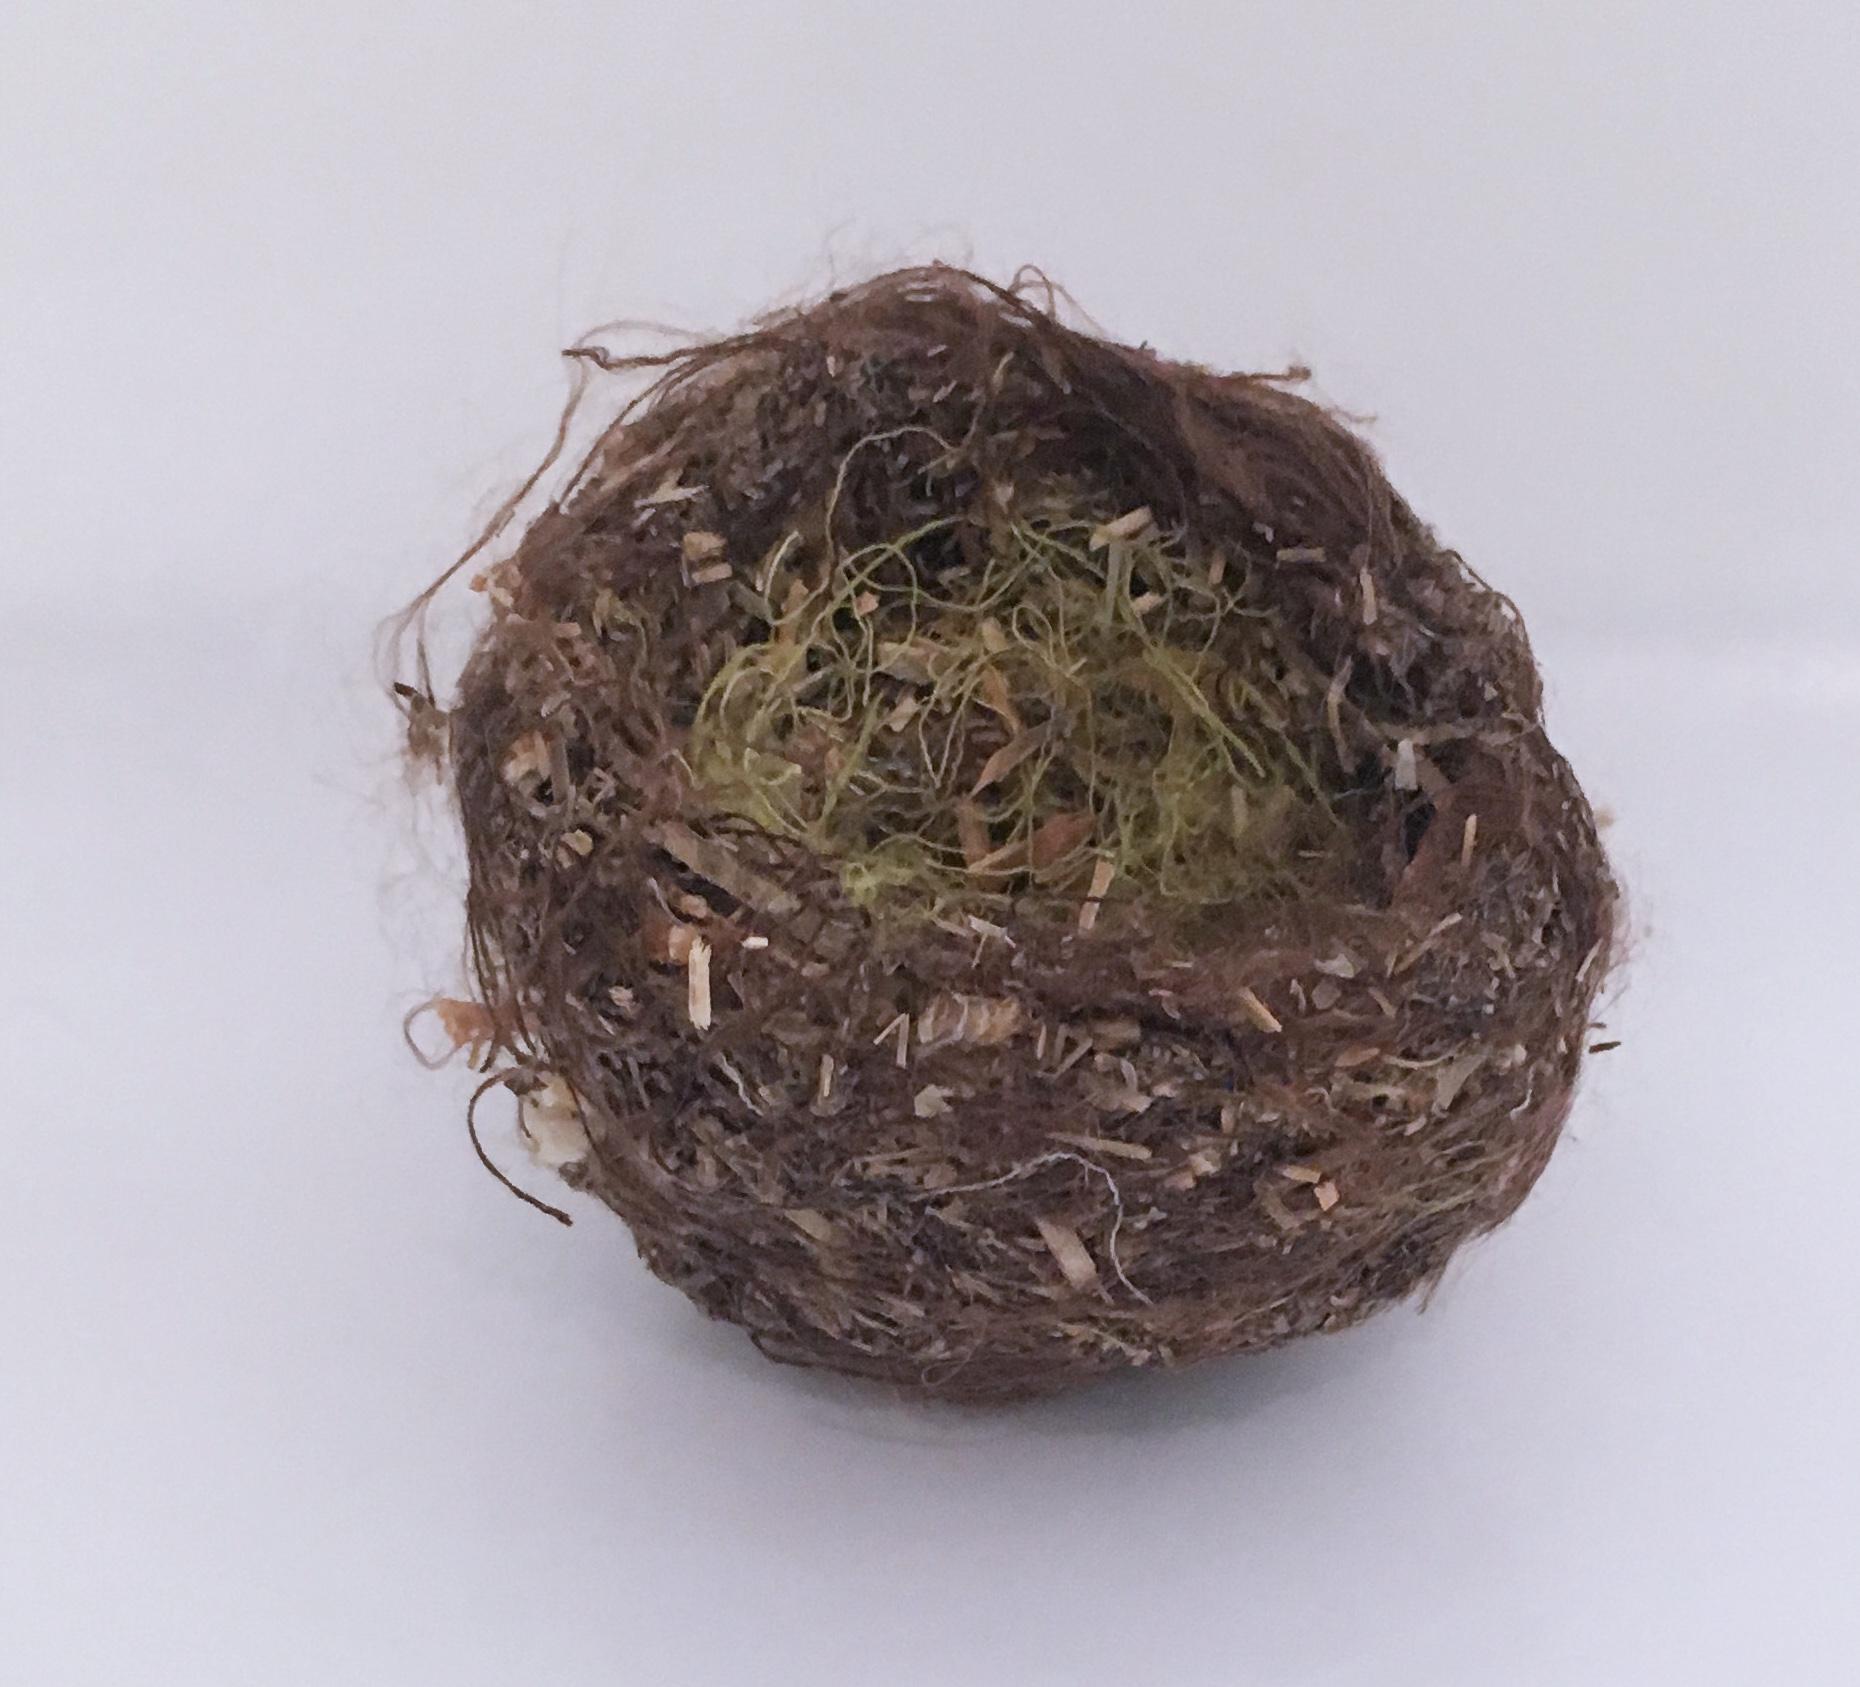 Brown Nest, Small Upcycle Textile & Found Object Sculpture, Nature Sculpture - Art by Robert Lach